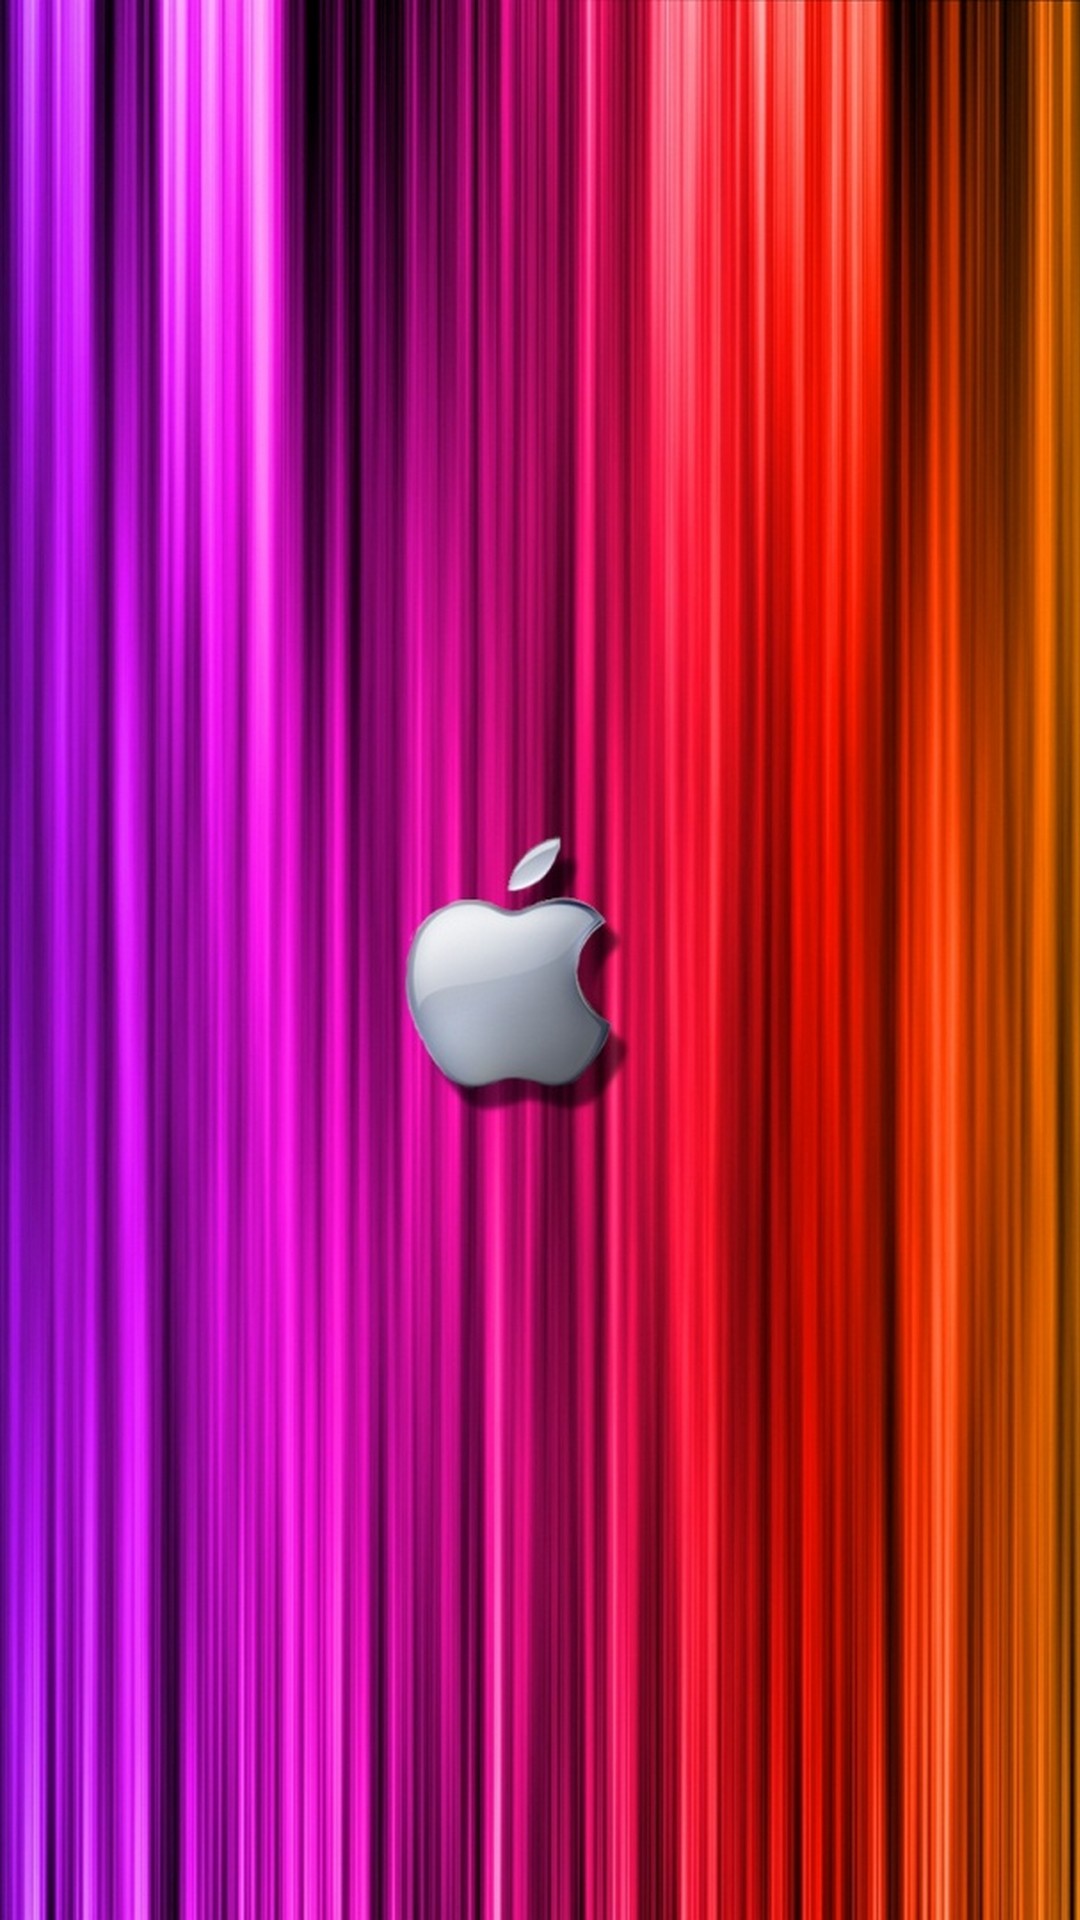 iPhone Wallpaper Rainbow with resolution 1080X1920 pixel. You can make this wallpaper for your iPhone 5, 6, 7, 8, X backgrounds, Mobile Screensaver, or iPad Lock Screen